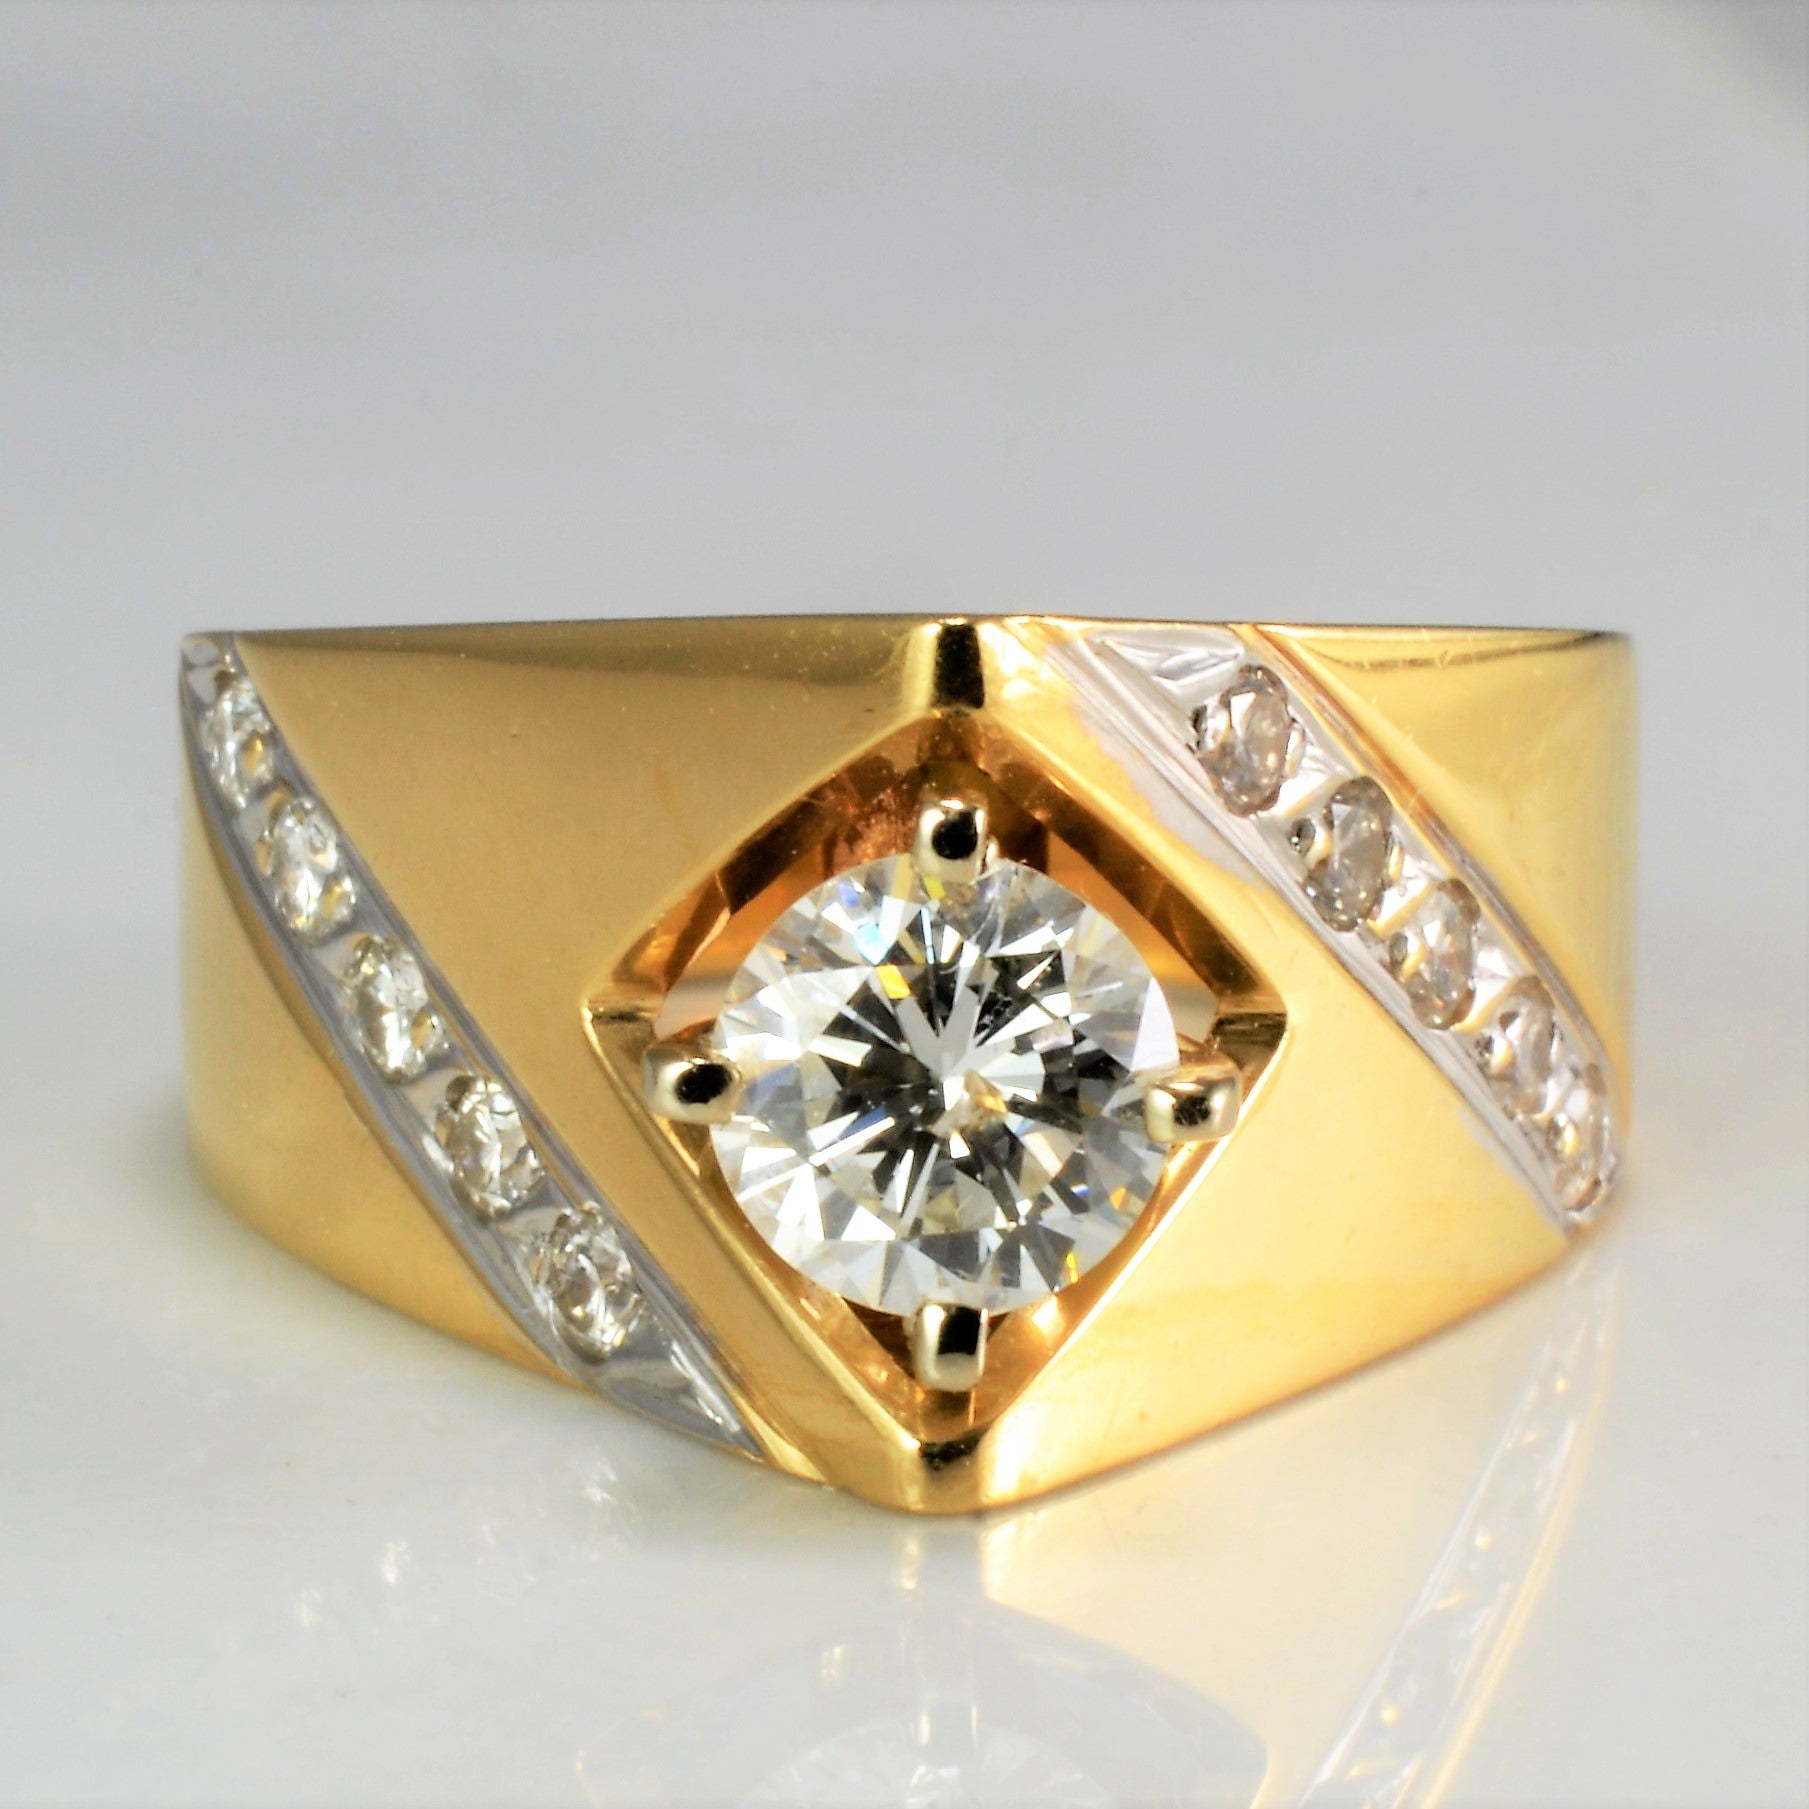 High Set Solitaire with Accents Diamond Ring | 0.73 ctw, SZ 5.75 |